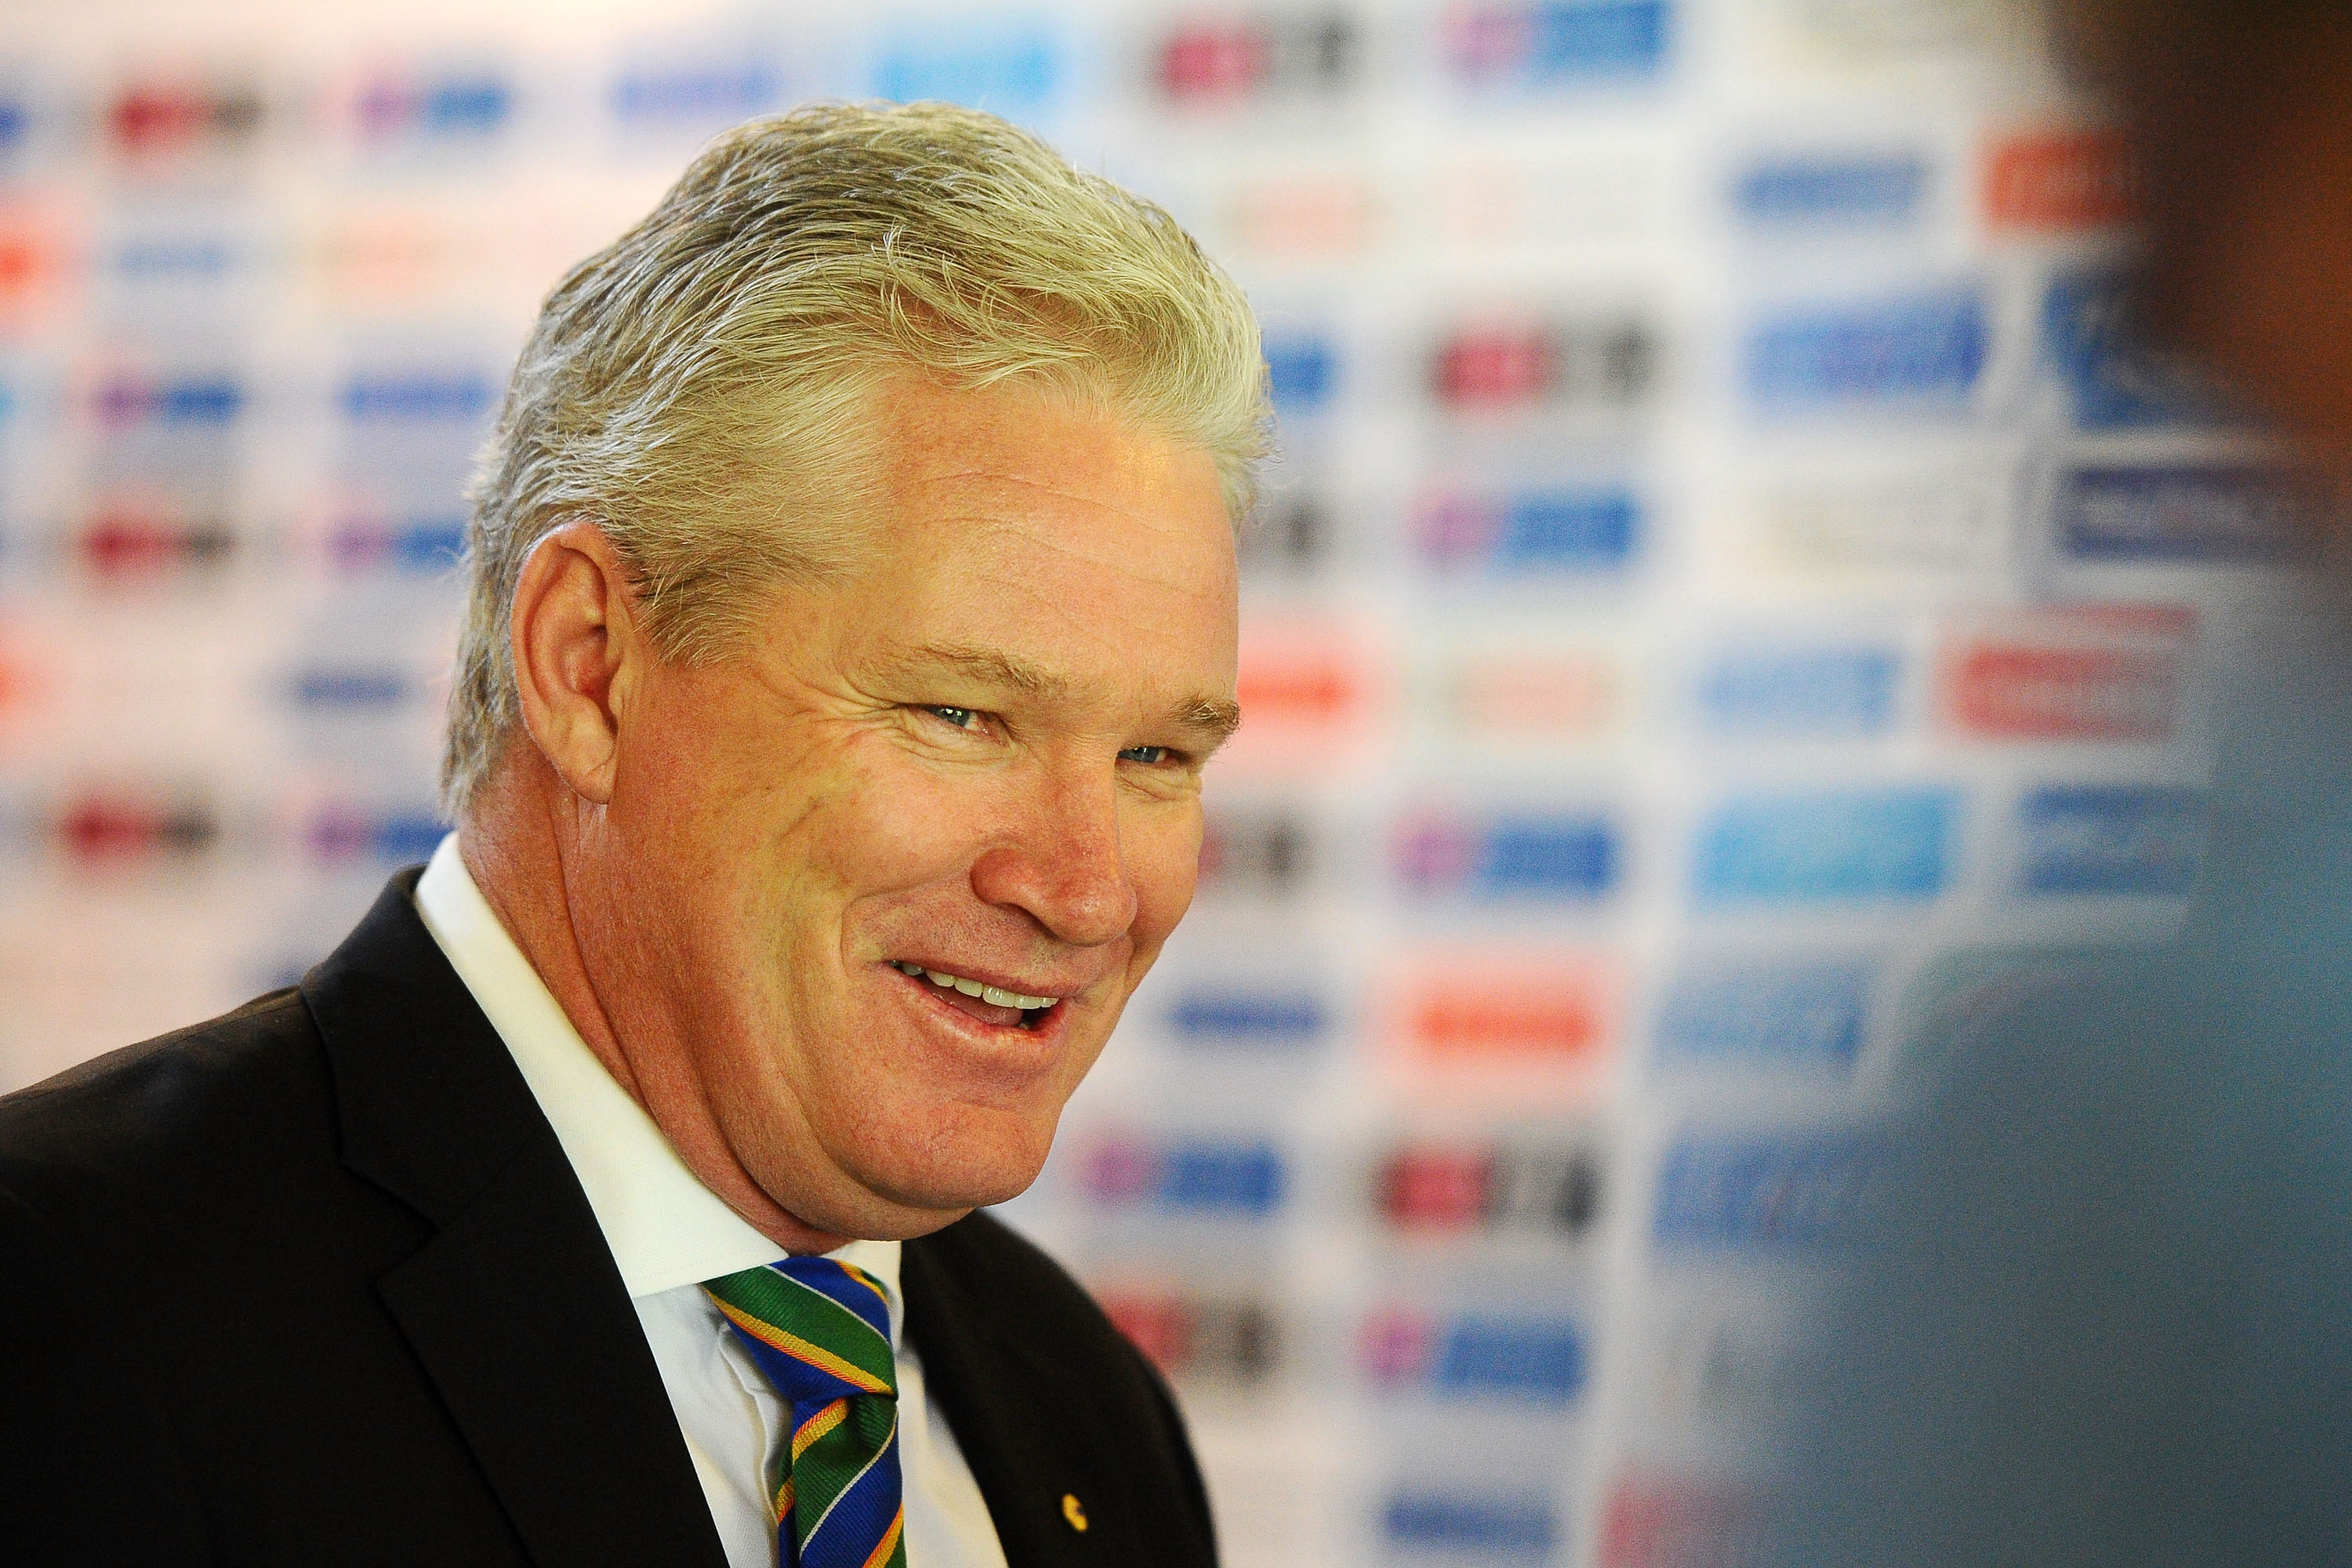 IND vs AUS | Players set to wear black armbands during first ODI to honour Dean Jones